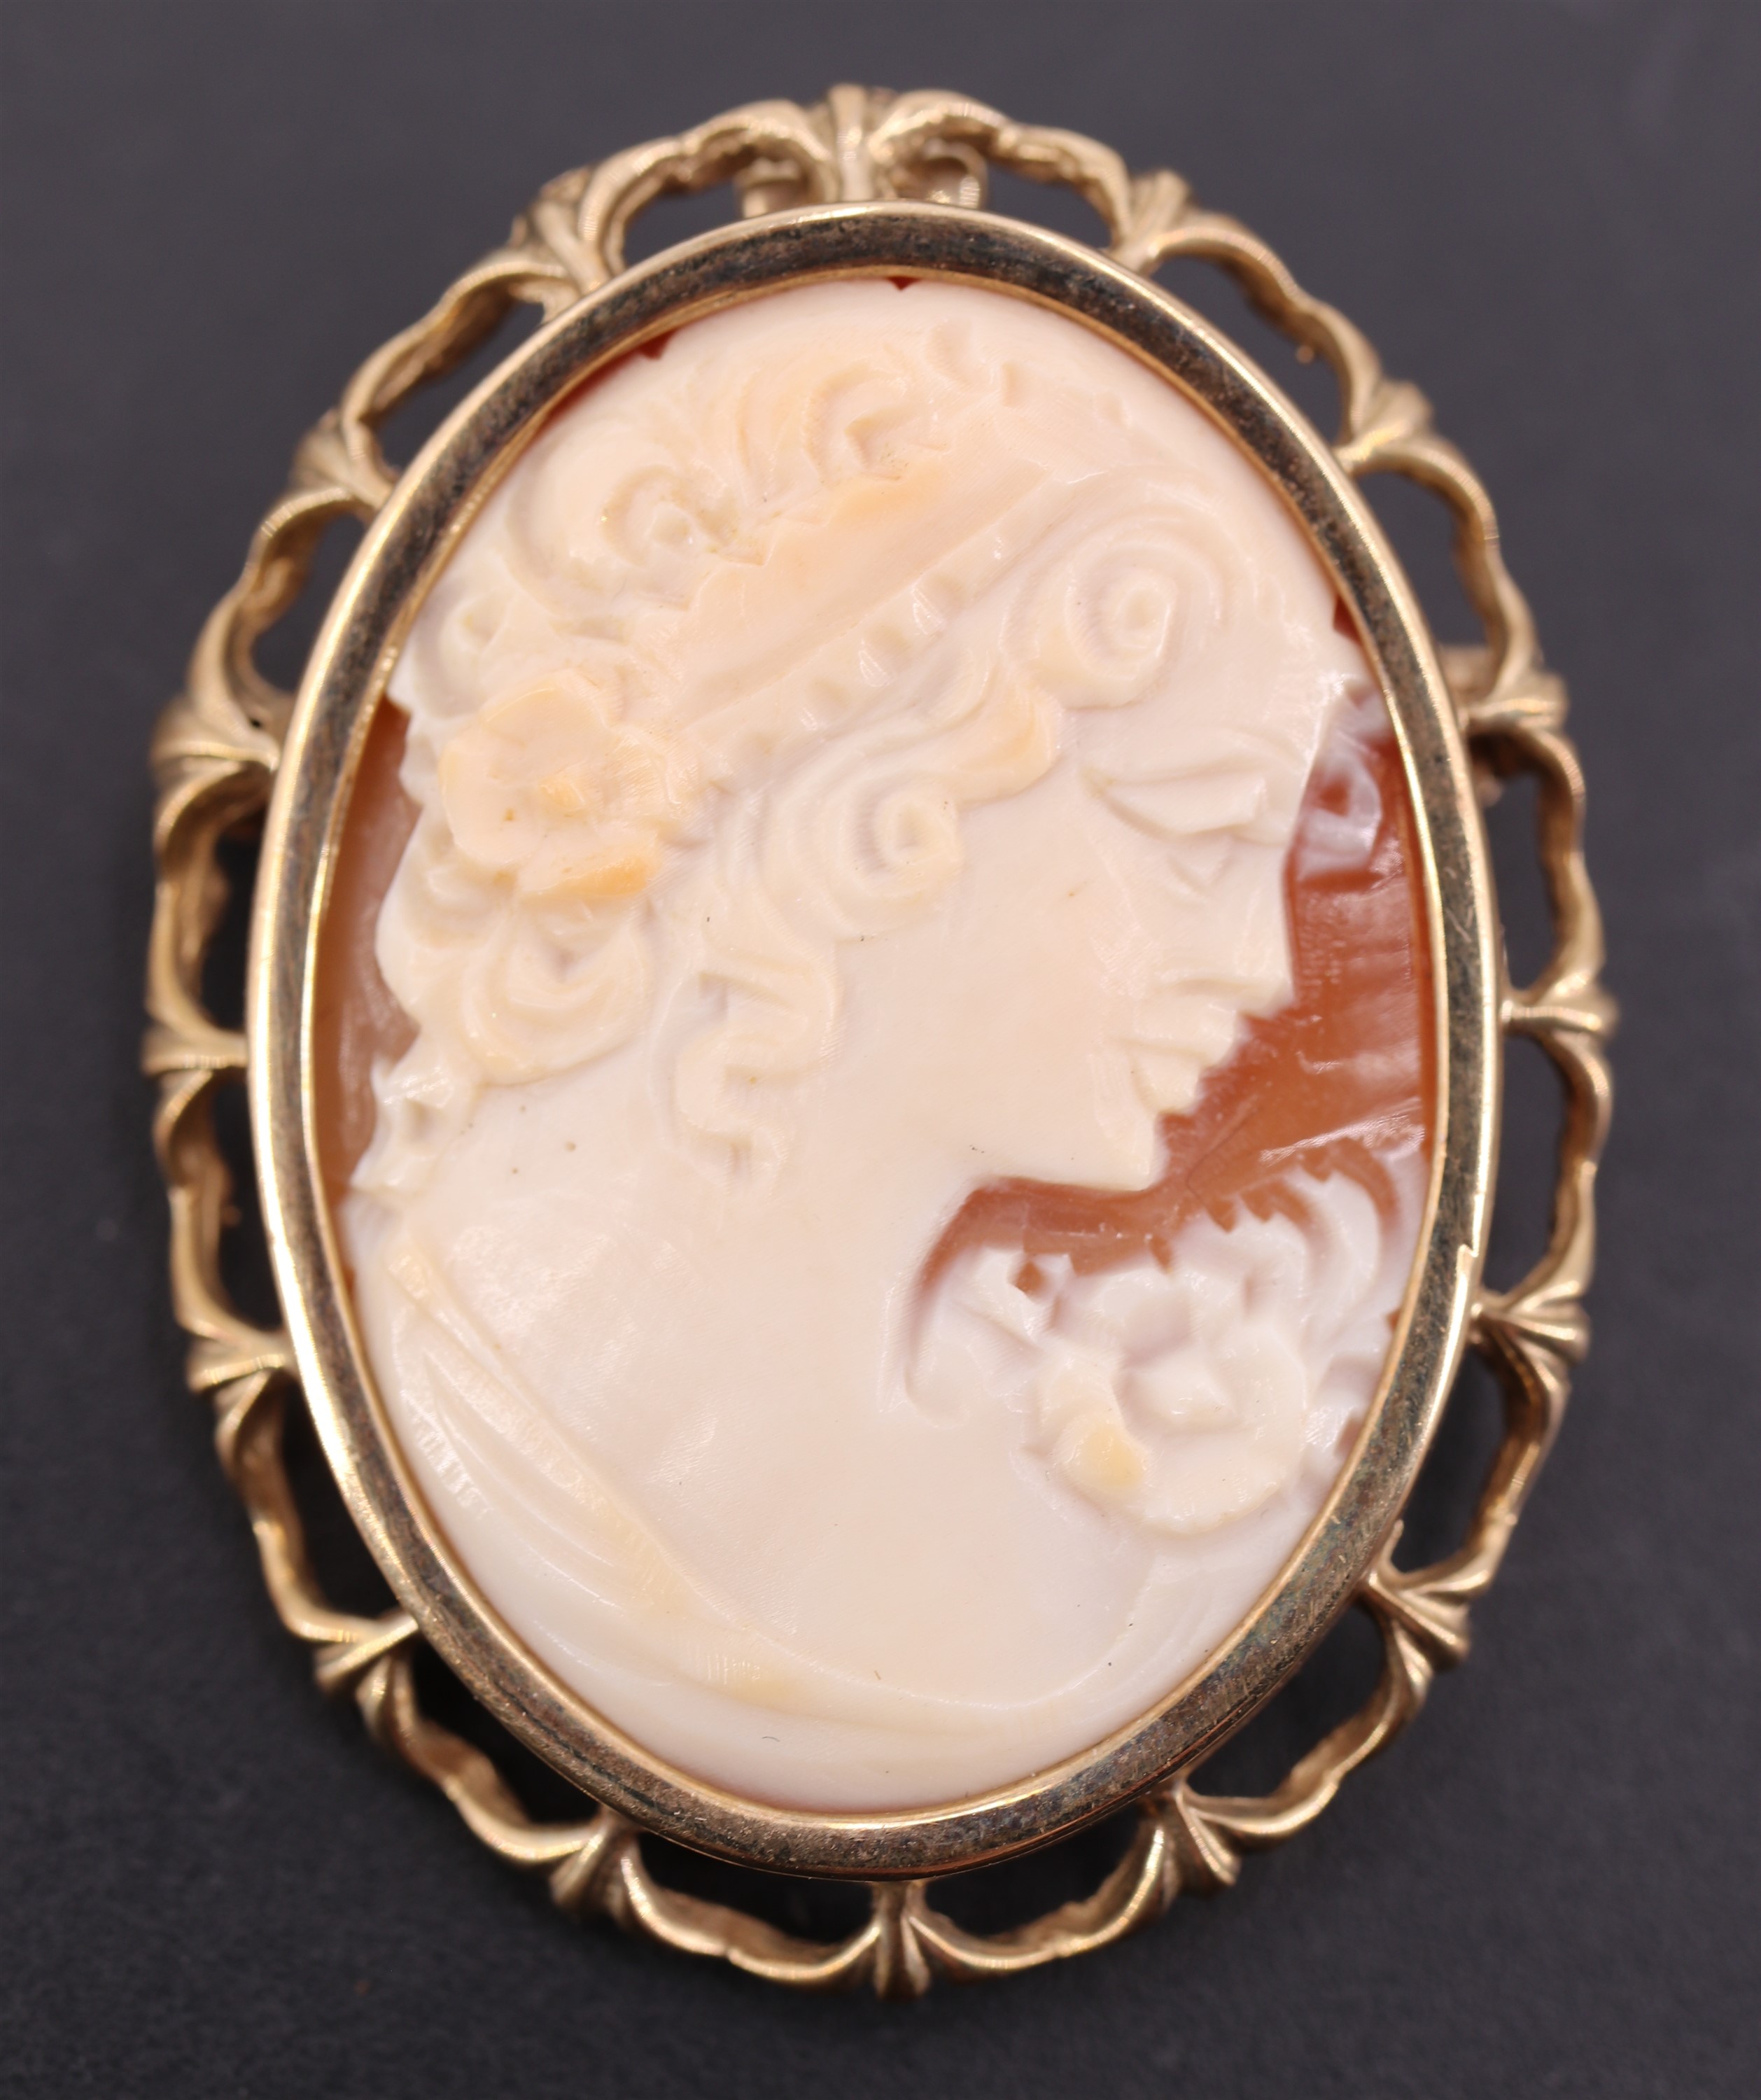 A 9 ct gold mounted shell cameo brooch, circa 1970s, (assay marks indistinct), 35 mm x 27 mm, 7.9 g